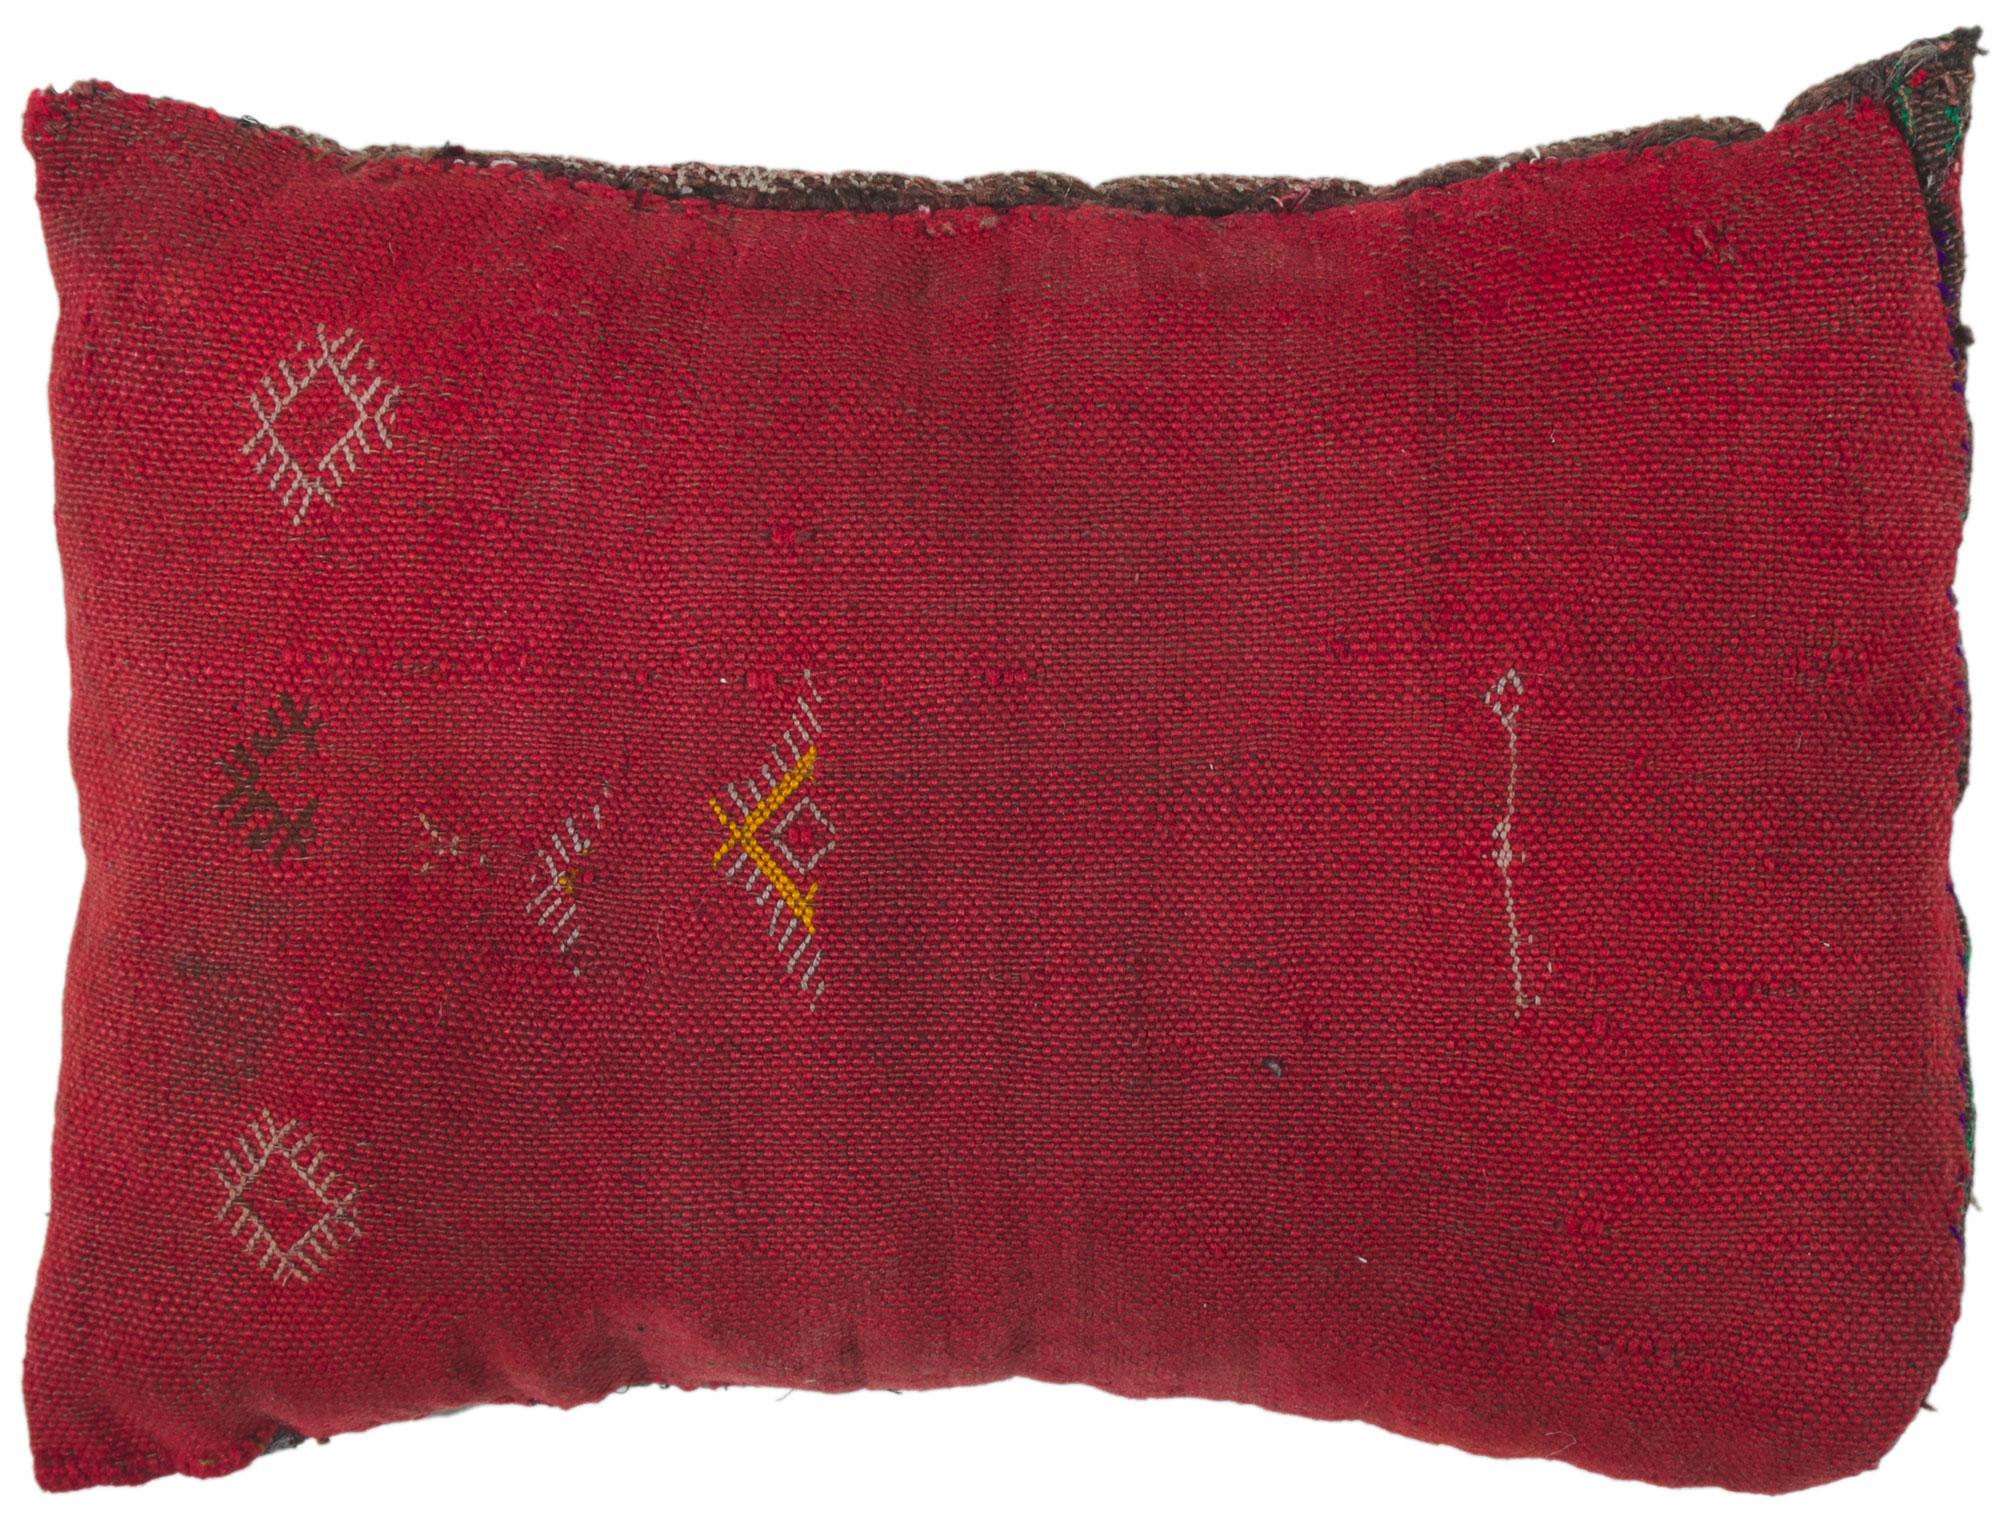 Vintage Zemmour Moroccan Rug Pillow by Berber Tribes of Morocco In Distressed Condition For Sale In Dallas, TX